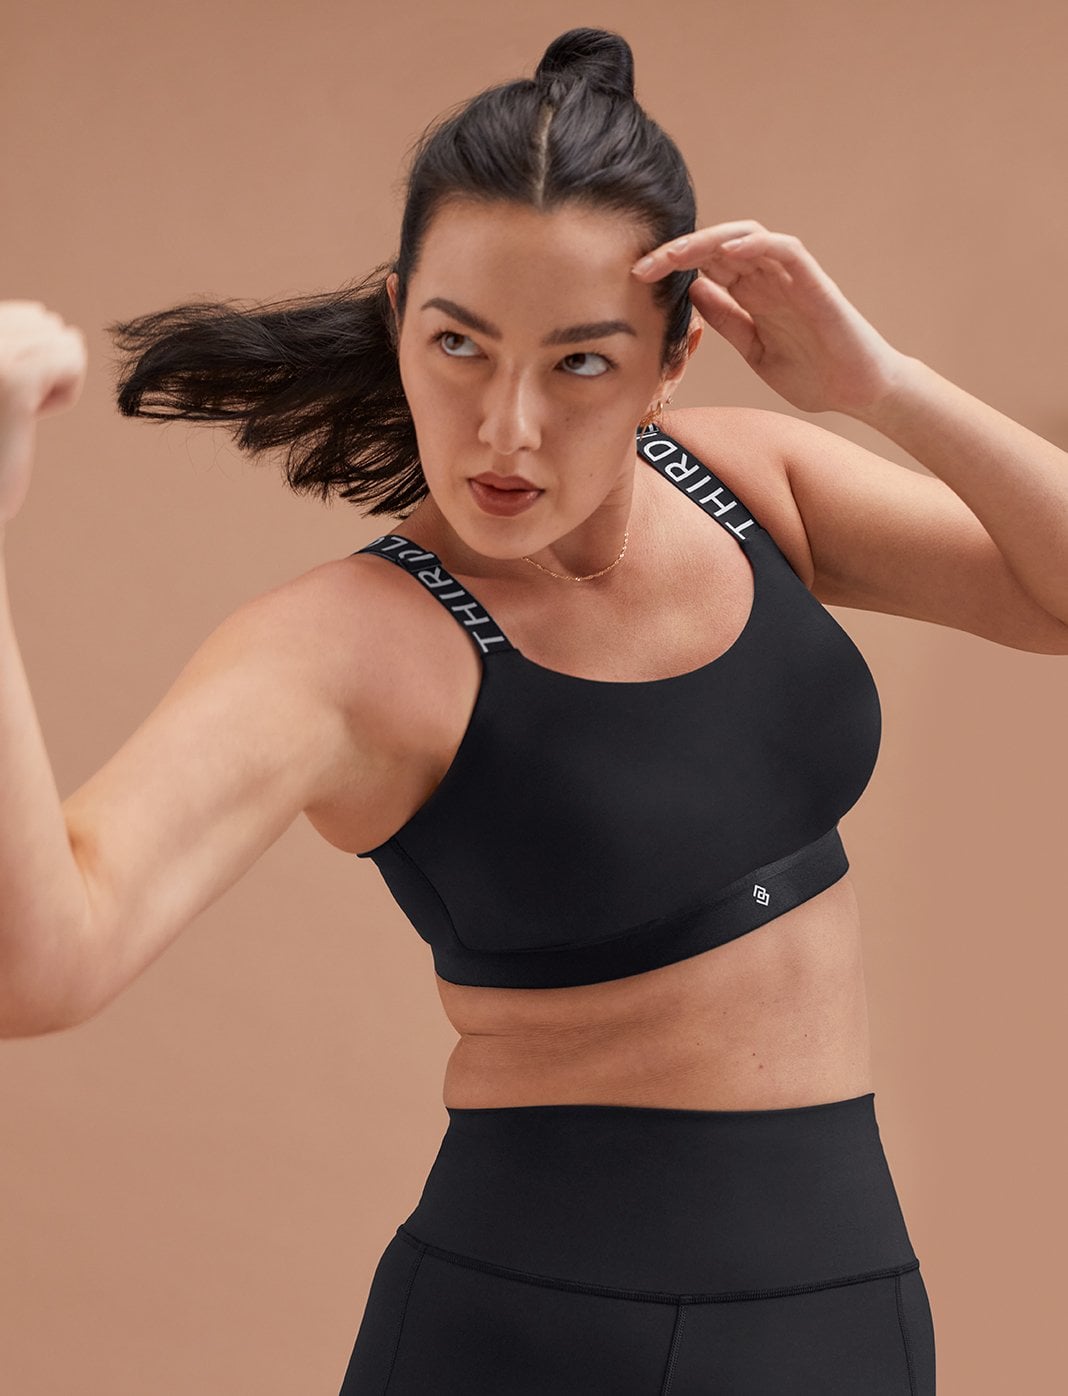 ThirdLove Activewear just launched and it's super stylish